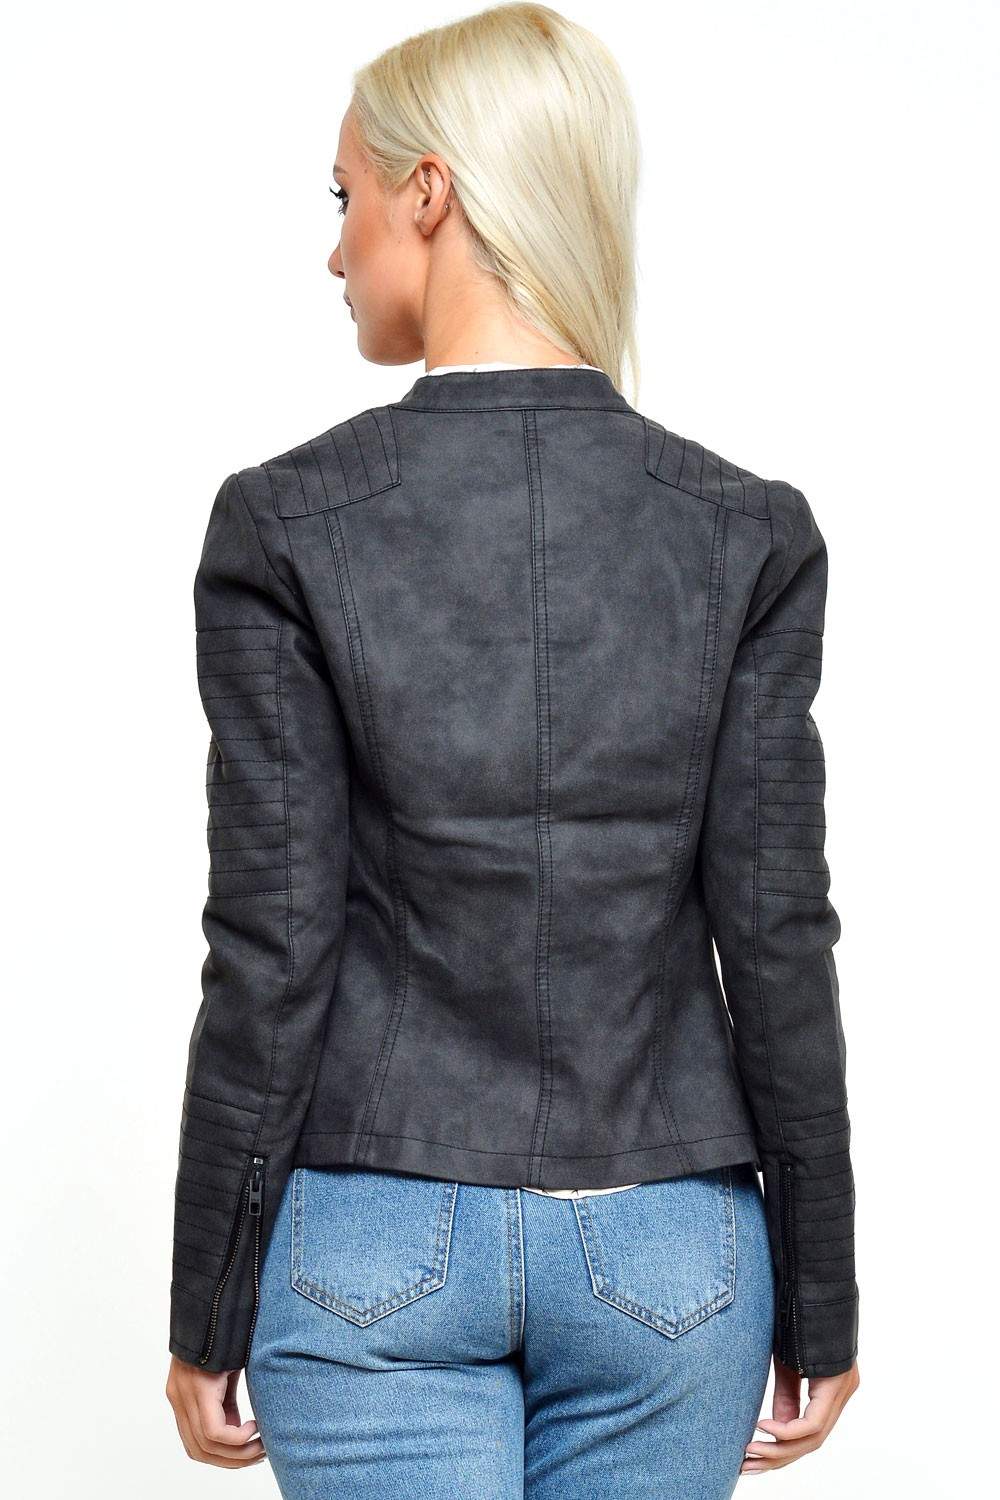 Only Ava Faux Leather Jacket in Black | iCLOTHING